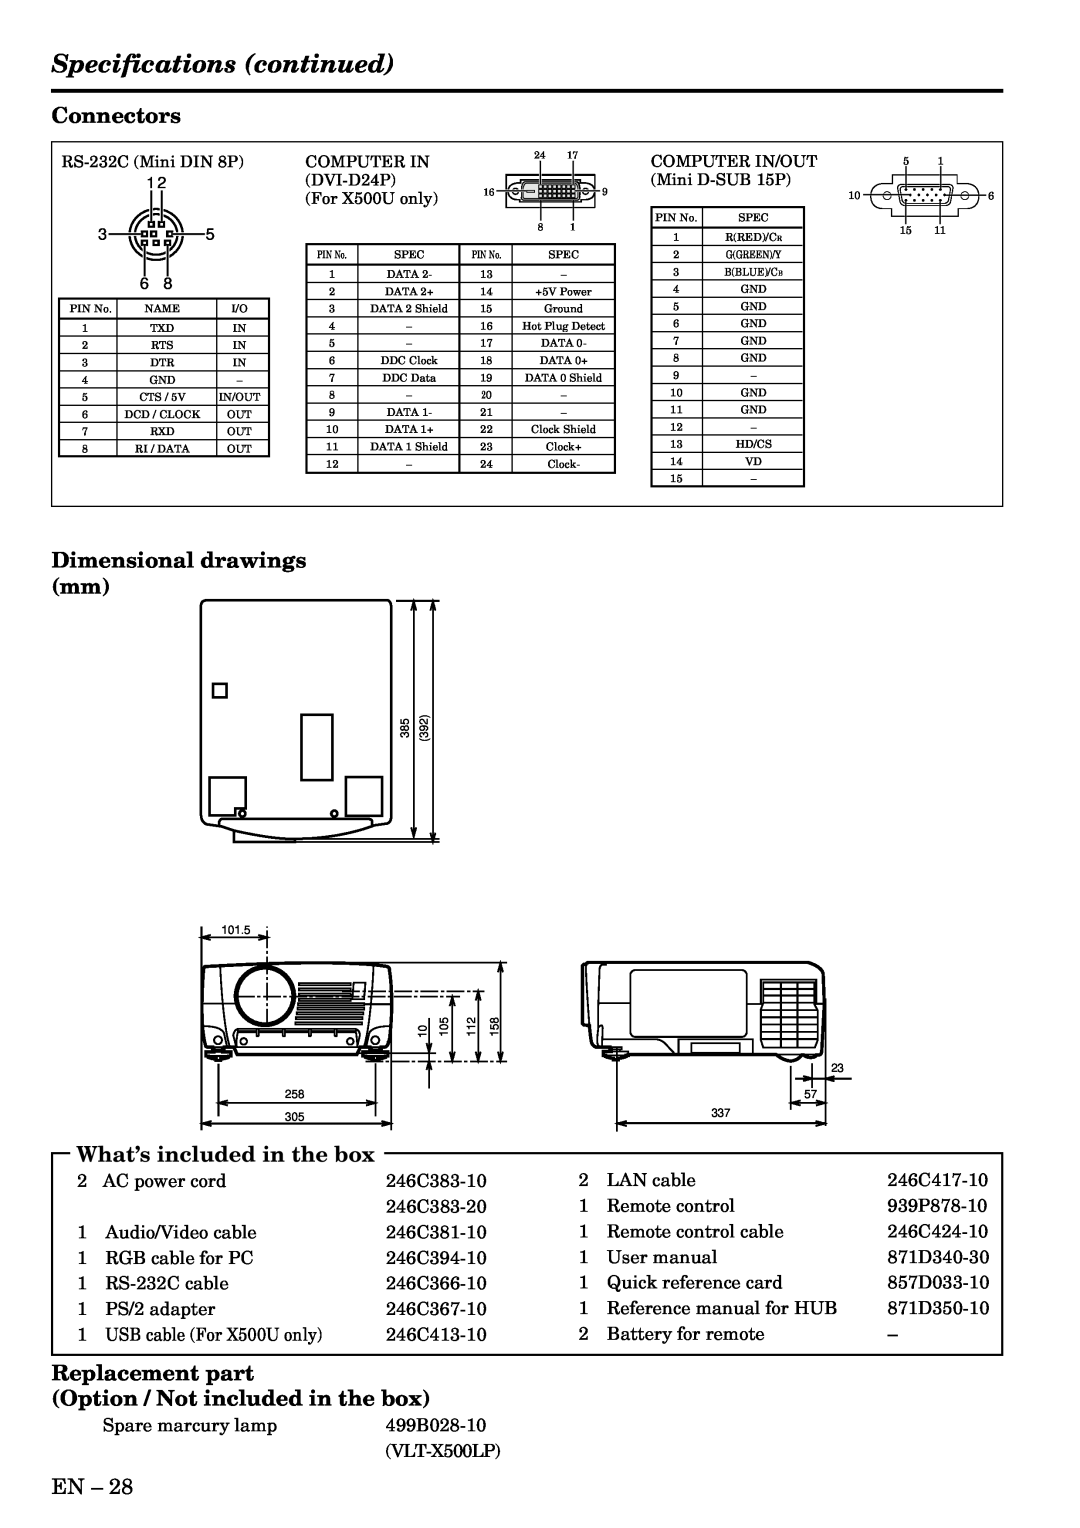 Mitsubishi Electronics X500 Specifications continued, Connectors, Dimensional drawings mm, What’s included in the box 